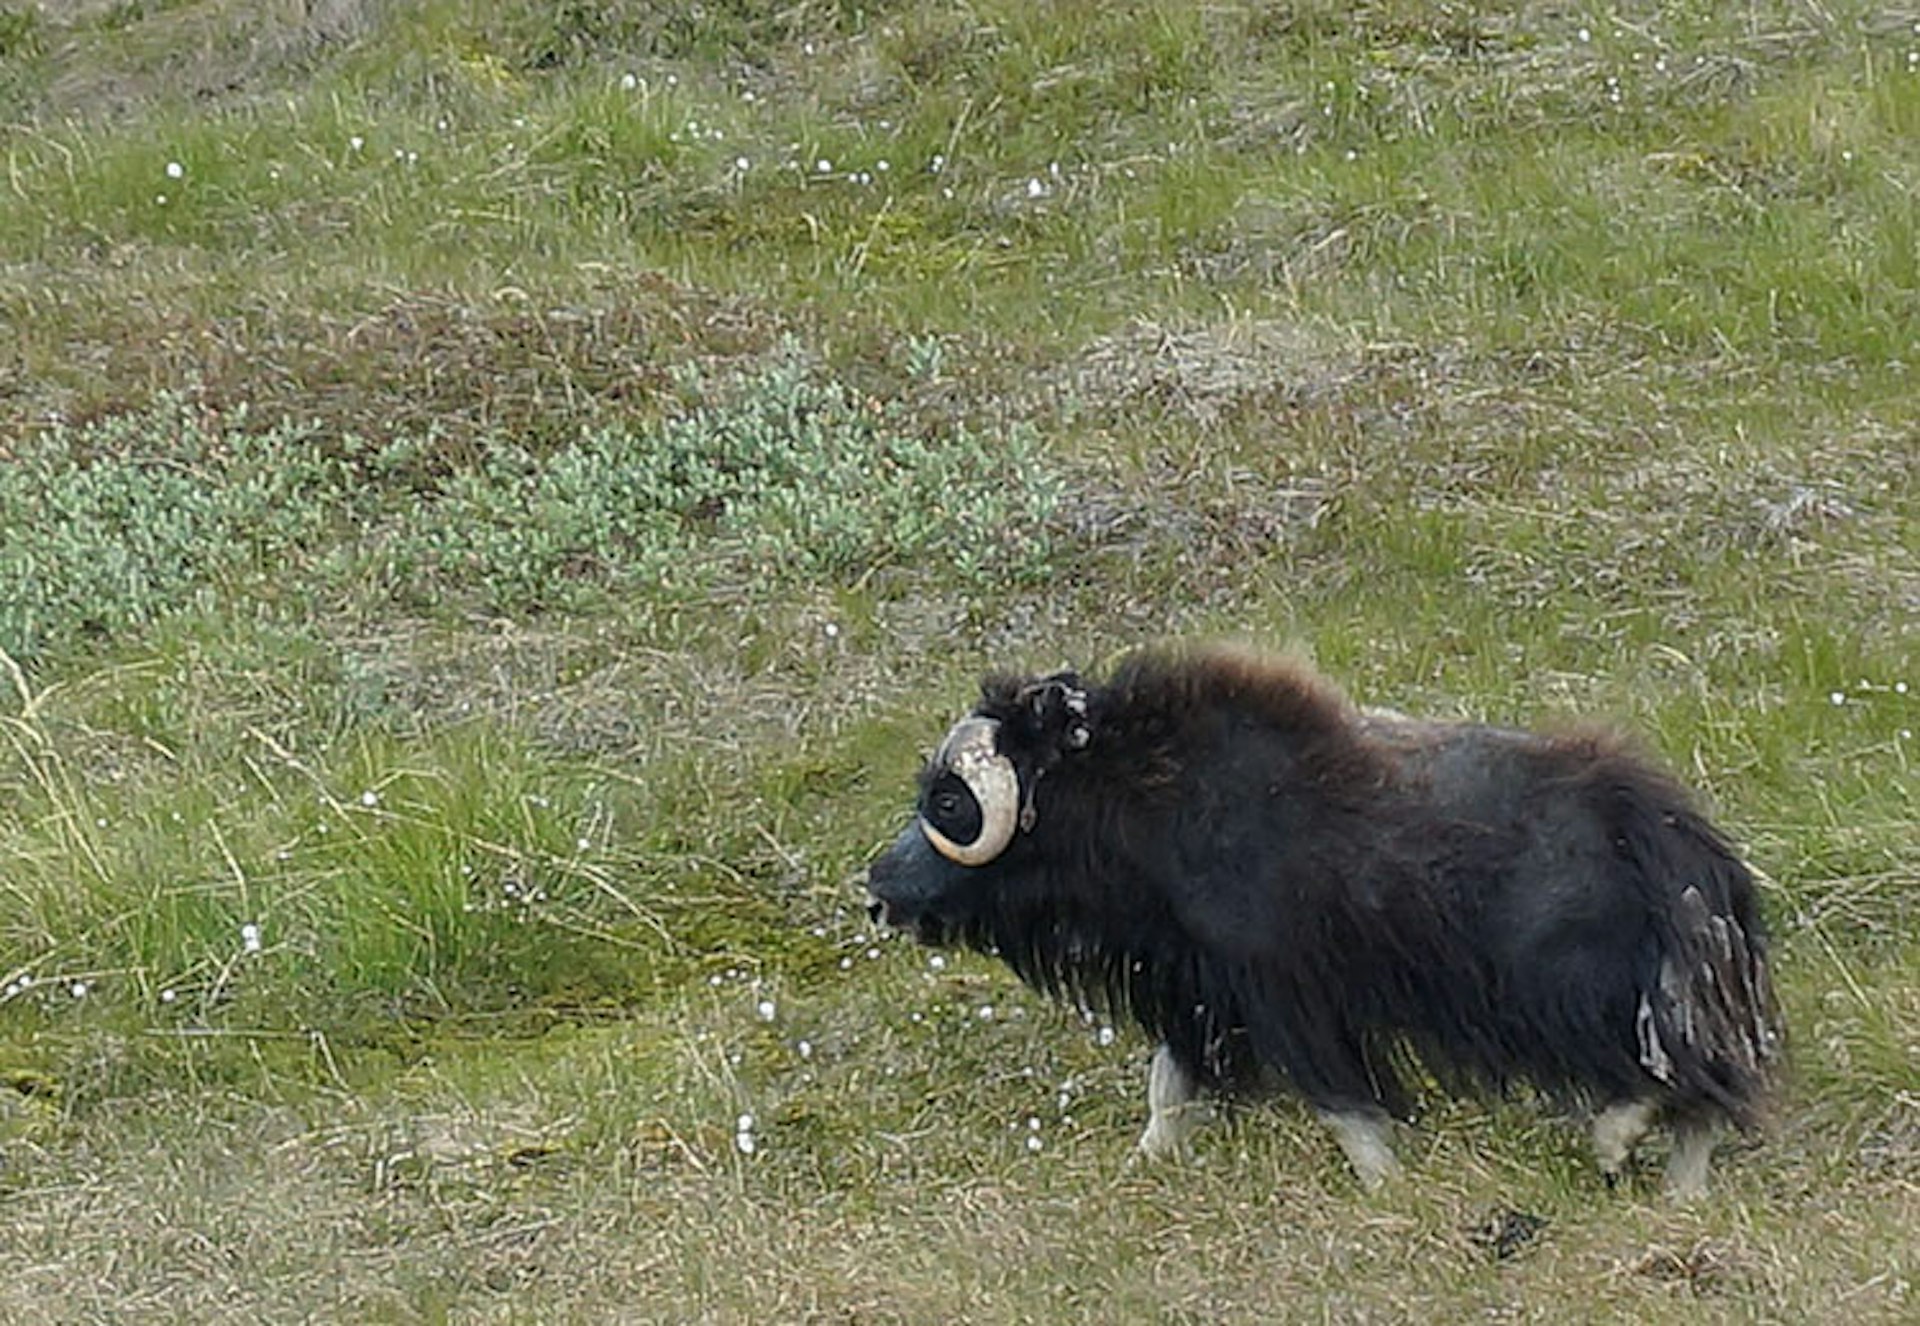 A bolting muskox: the finely tuned instincts of these creatures makes getting close a challenge. Image by Anita Isalska / Lonely Planet